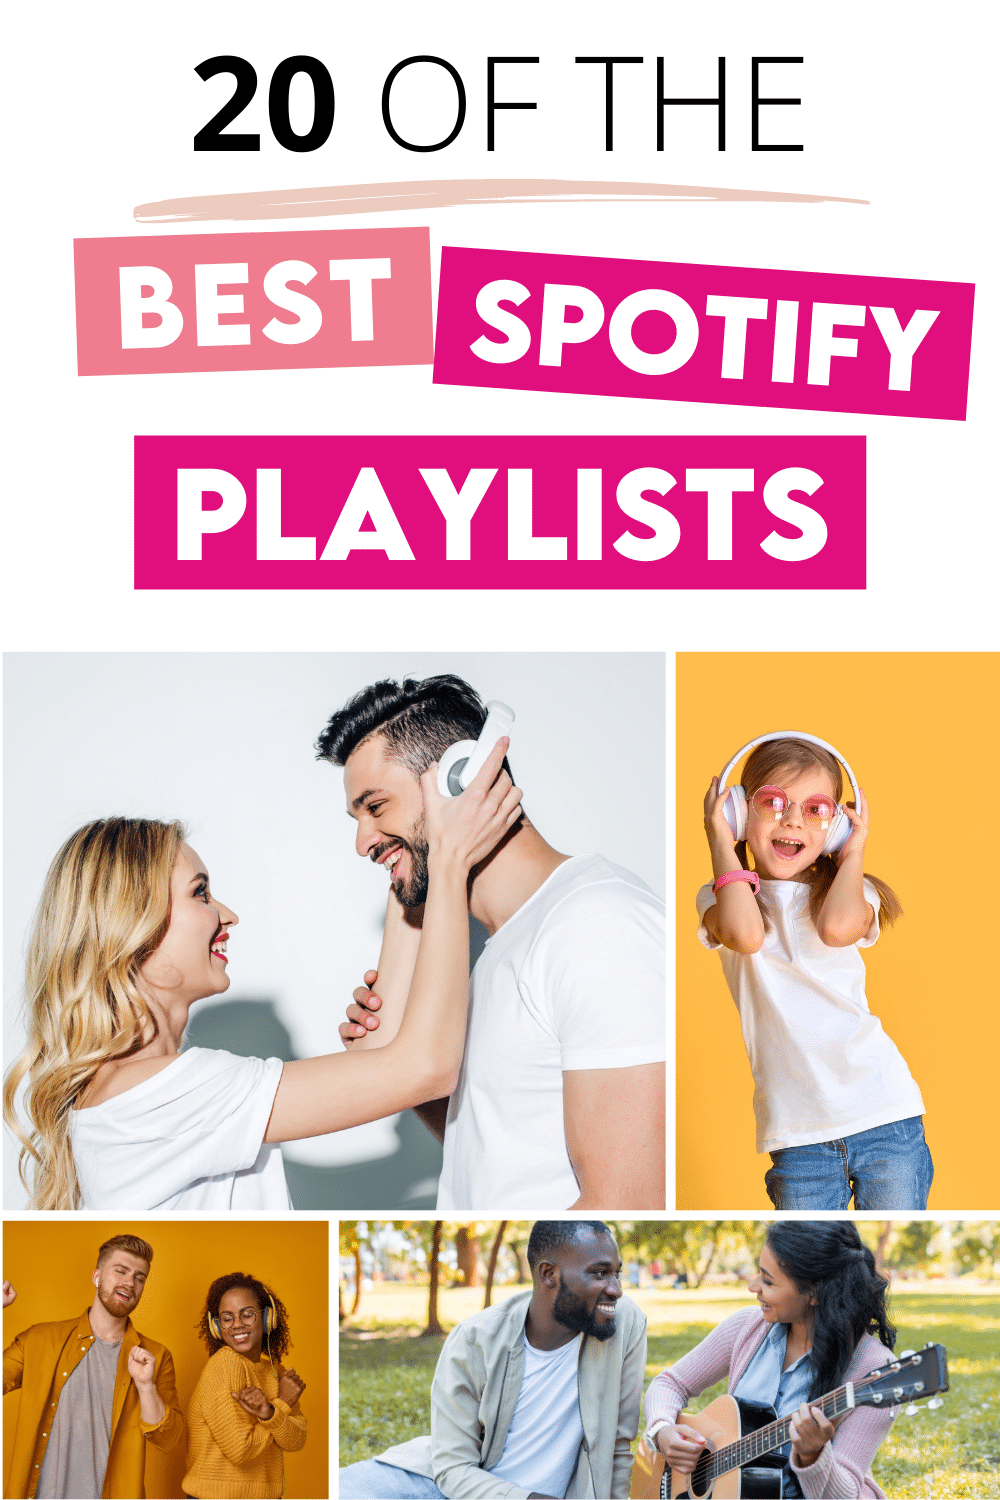 I love good Spotify playlists, and this list gives me 20! I can't wait to try out #14 for a fun party. | The Dating Divas